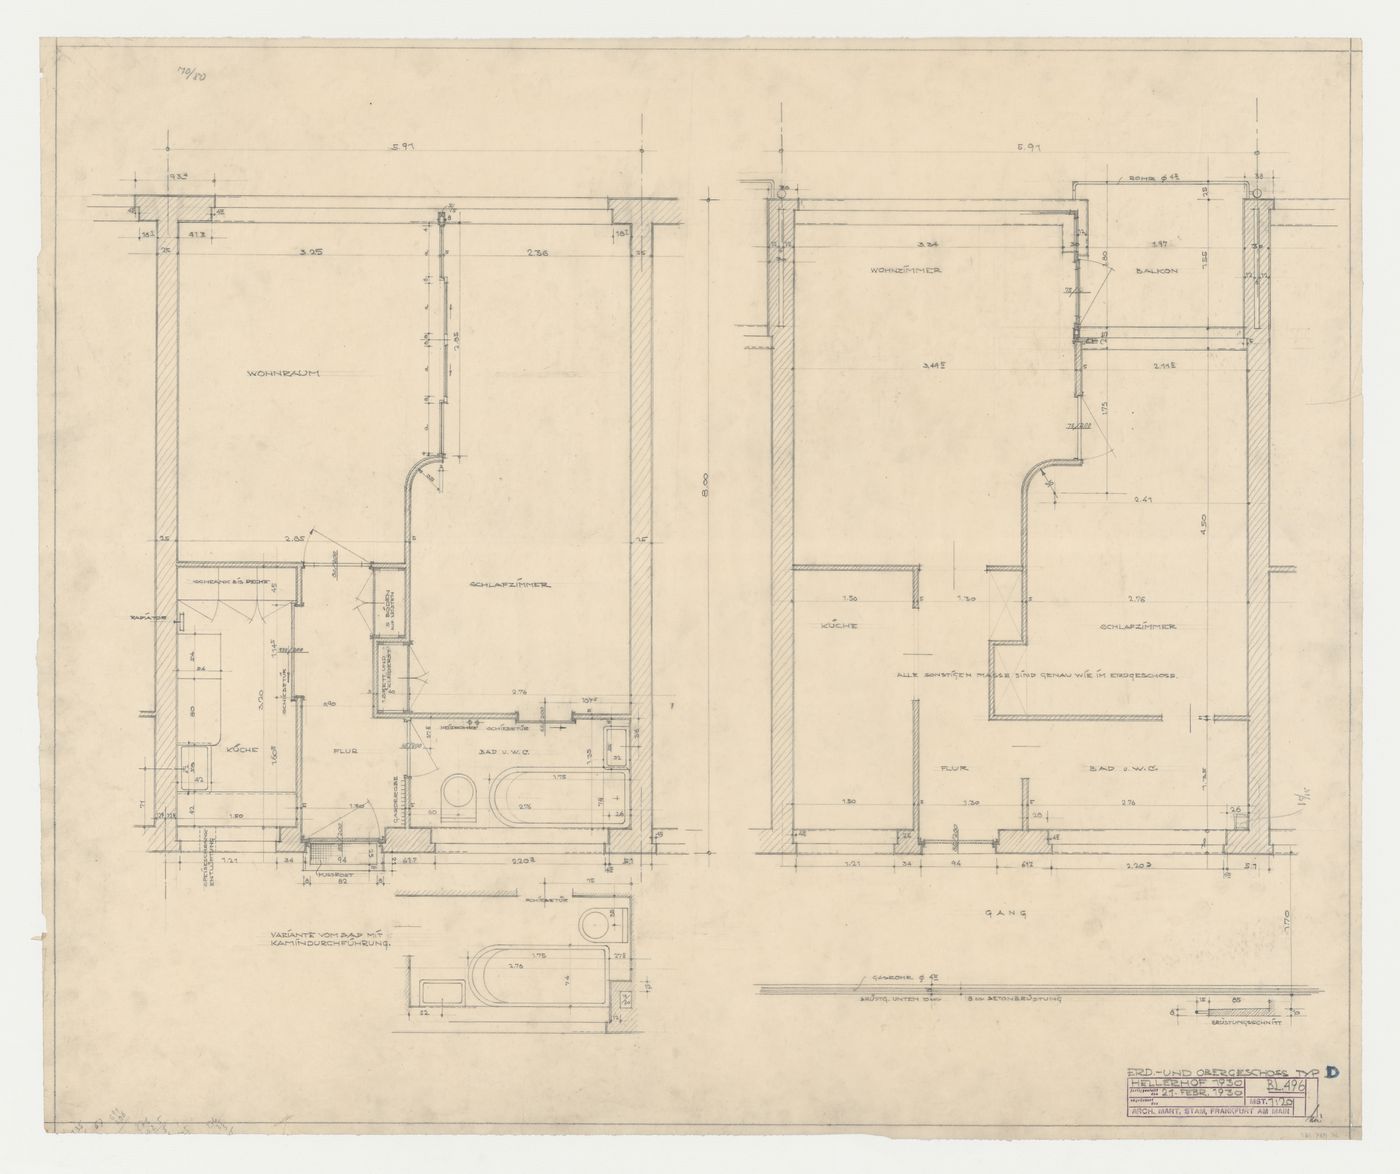 Section for a balustrade and ground, first, and partial first floor plans for a type D housing unit, Hellerhof Housing Estate, Frankfurt am Main, Germany